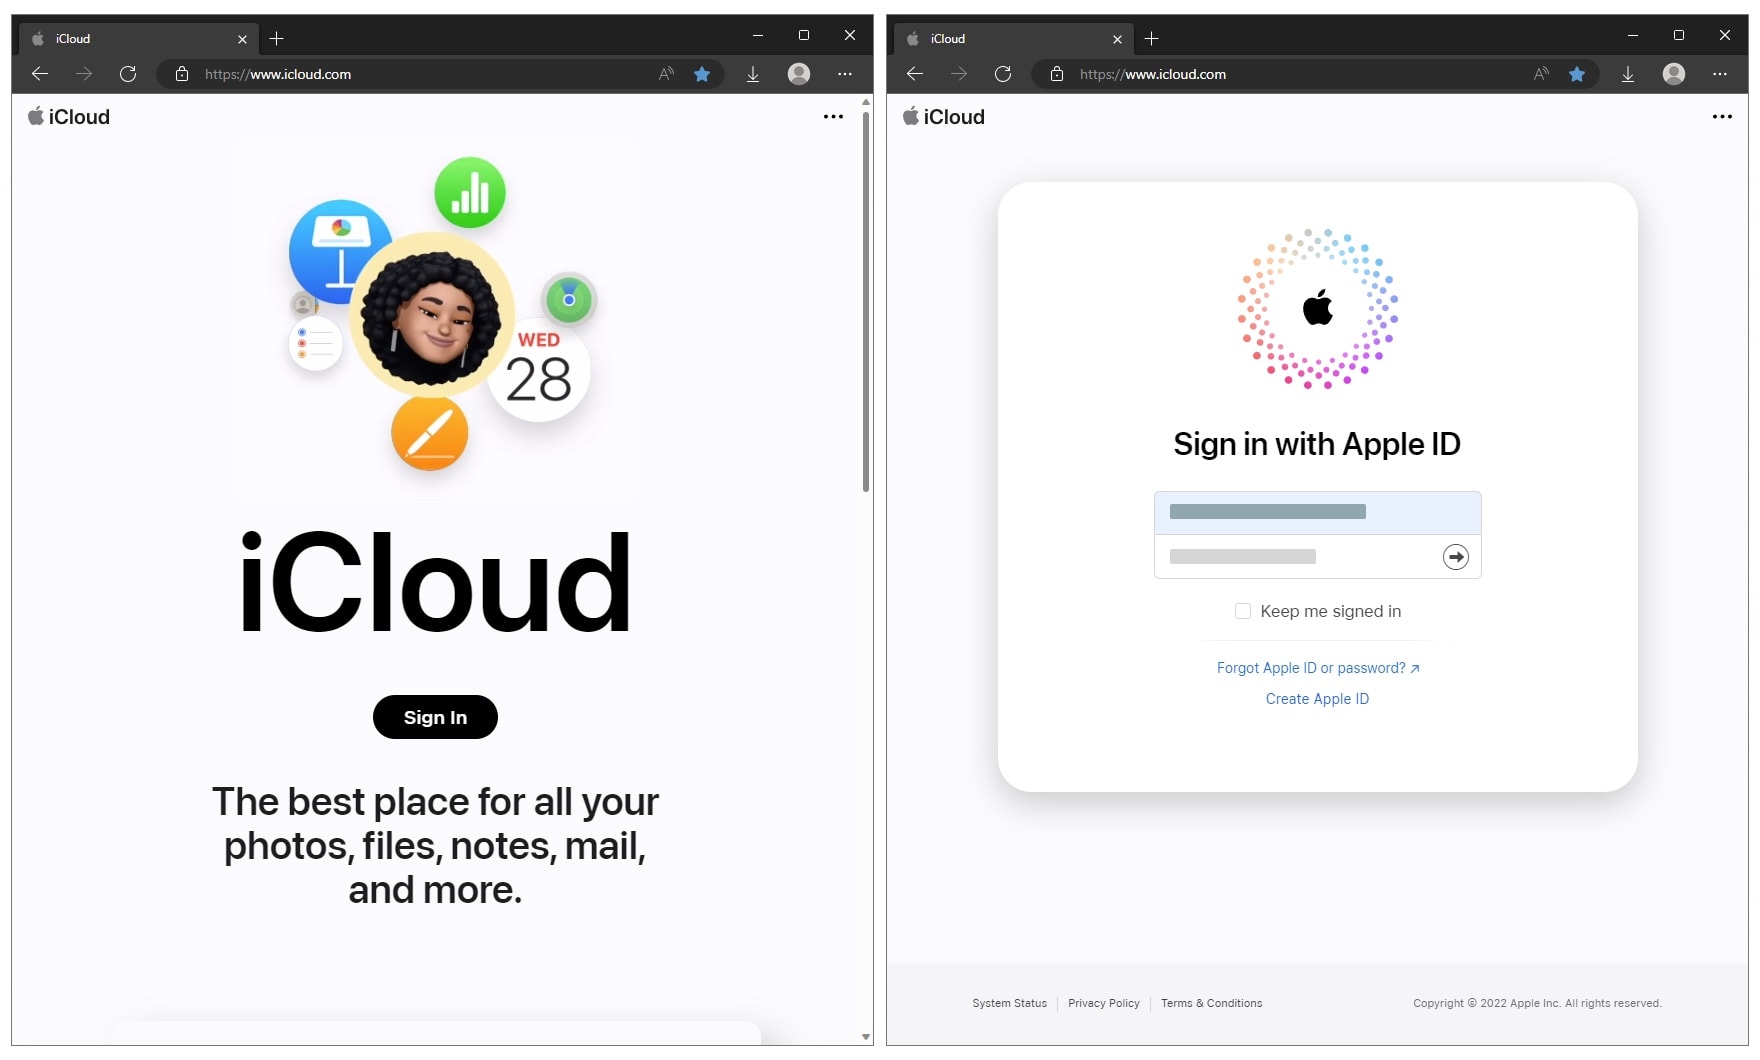 Signing into iCloud.com on Windows